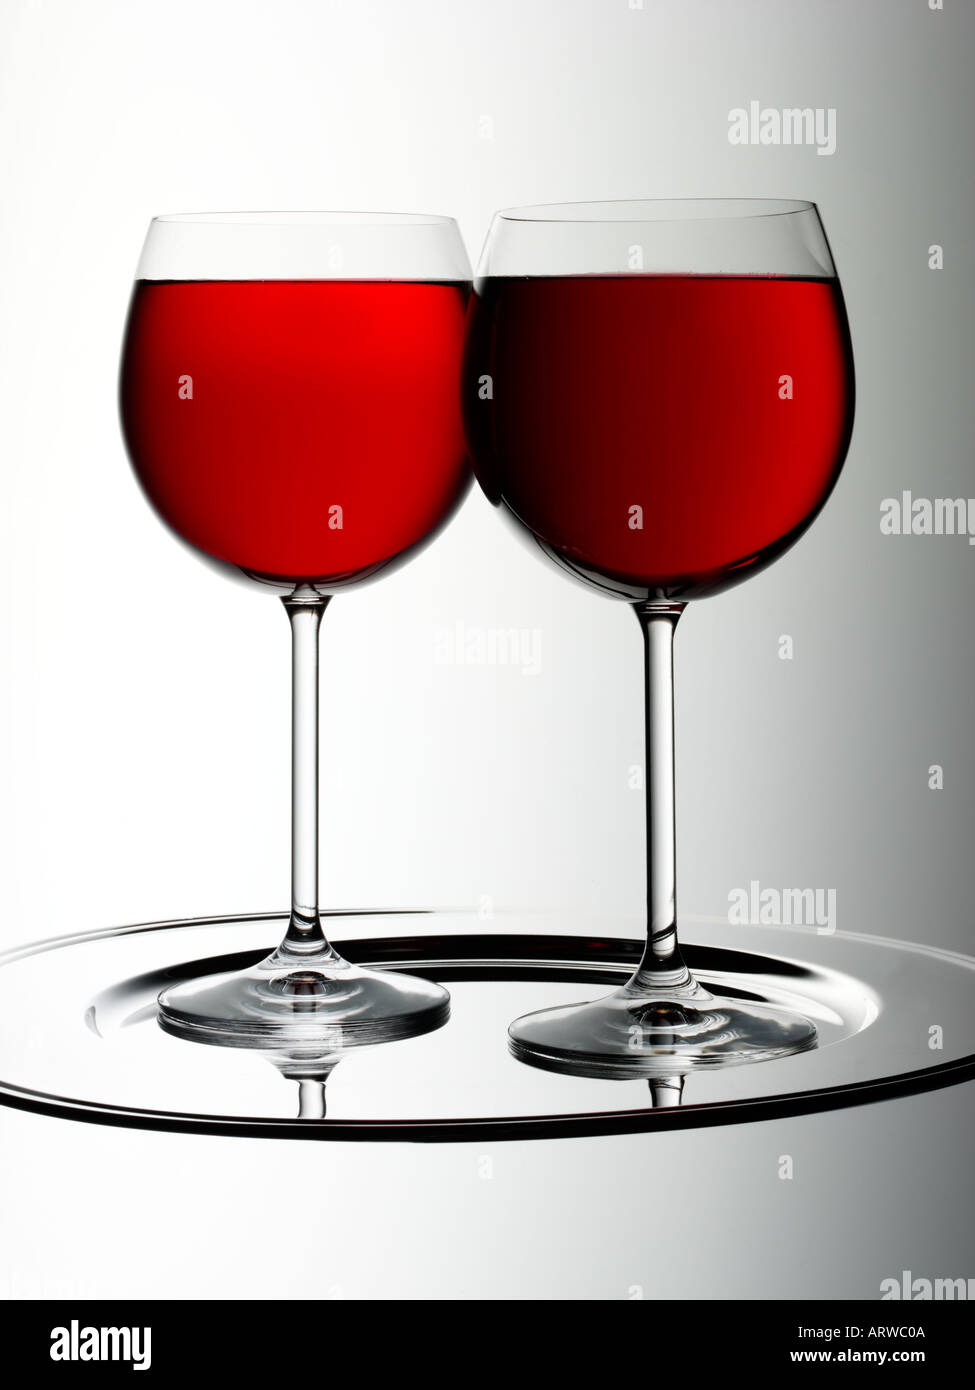 TWO GLASSES OF RED WINE Stock Photo